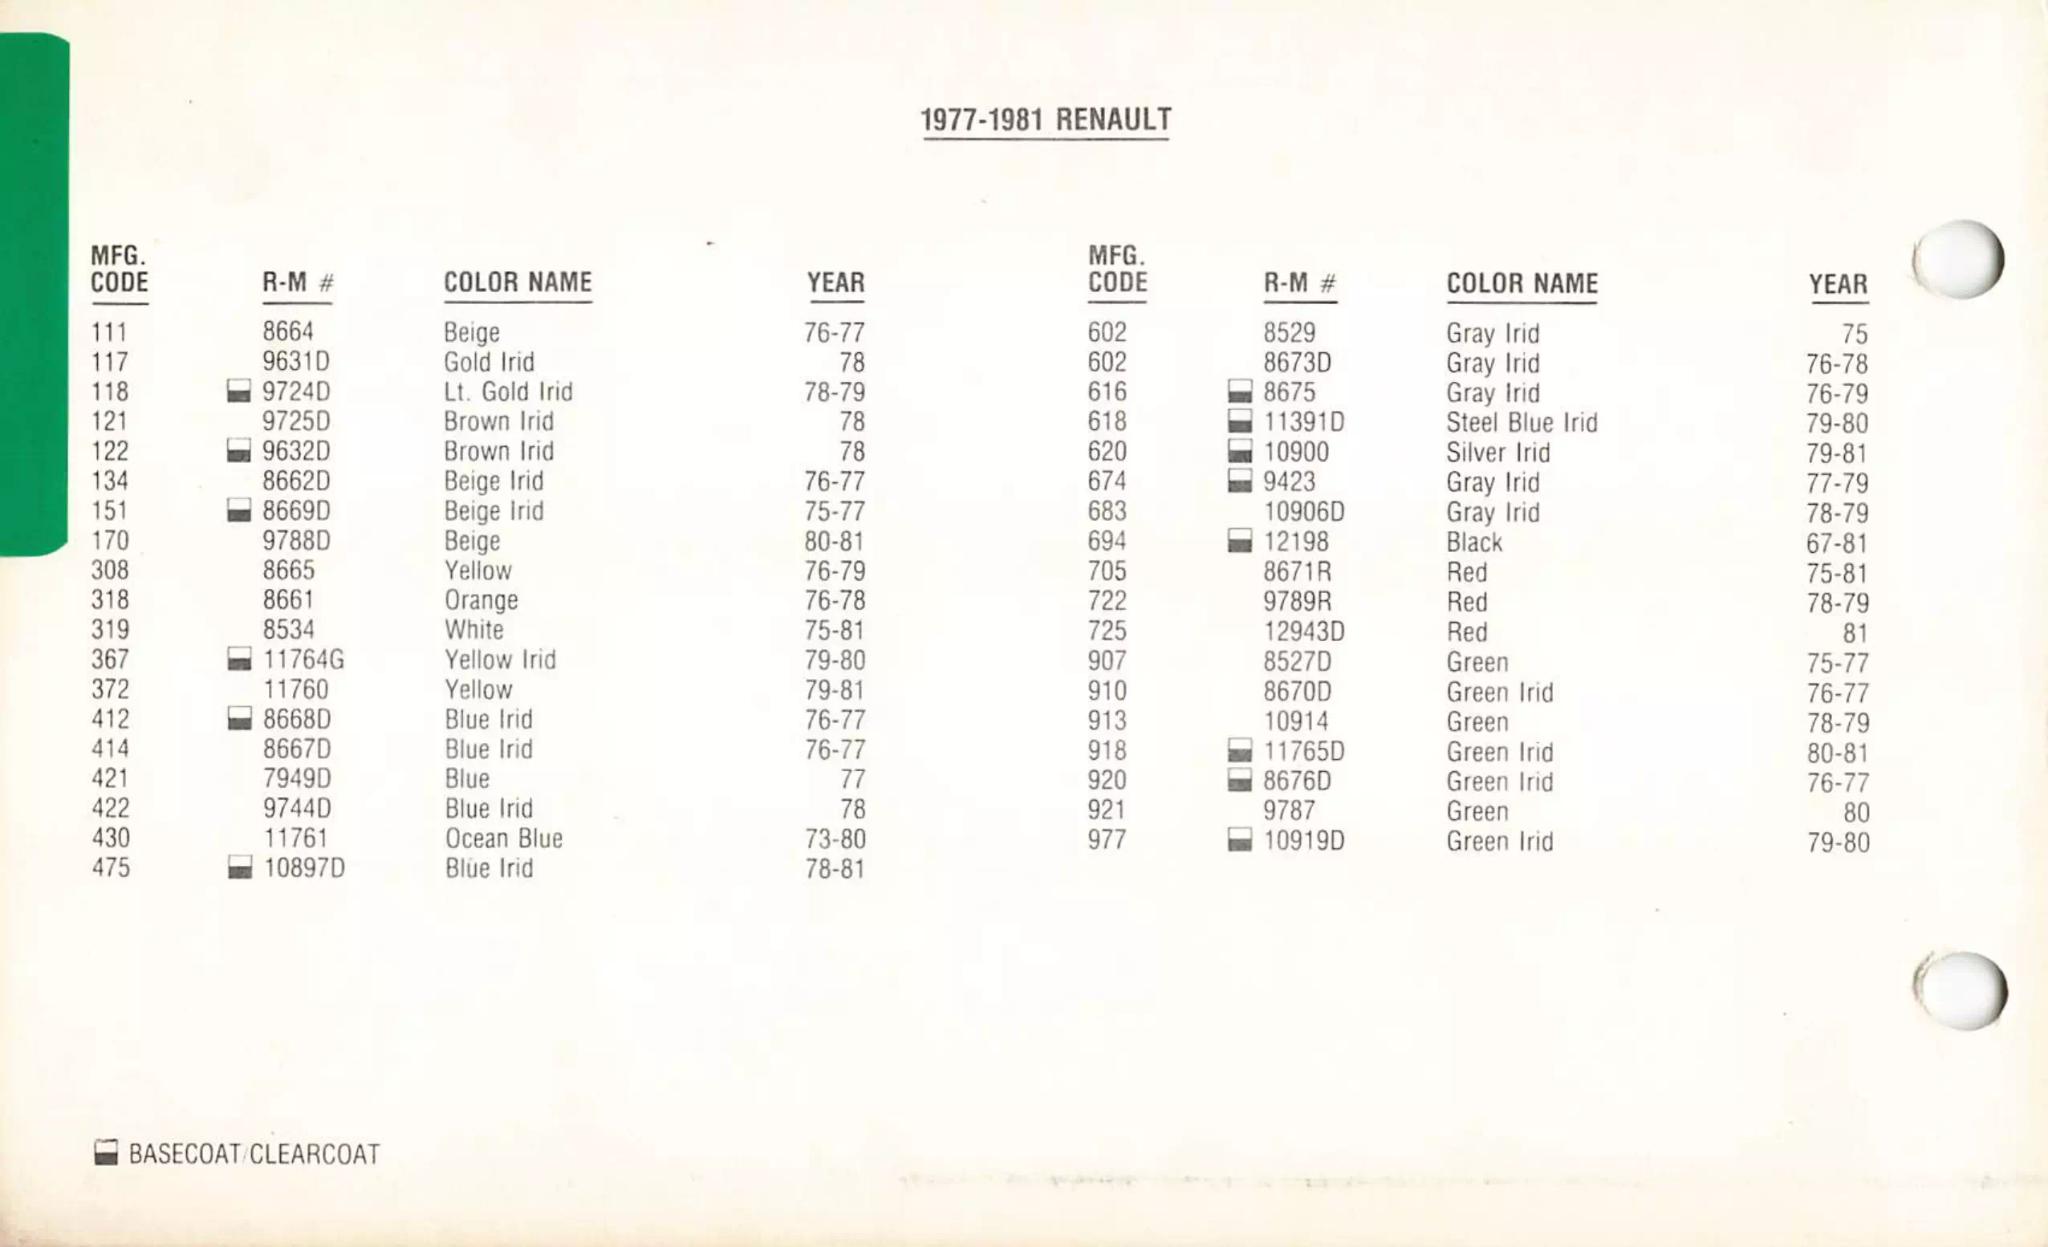 A paint code listing with the basf mixing stock numbers for 1977 to 1981 Renault vehicles.